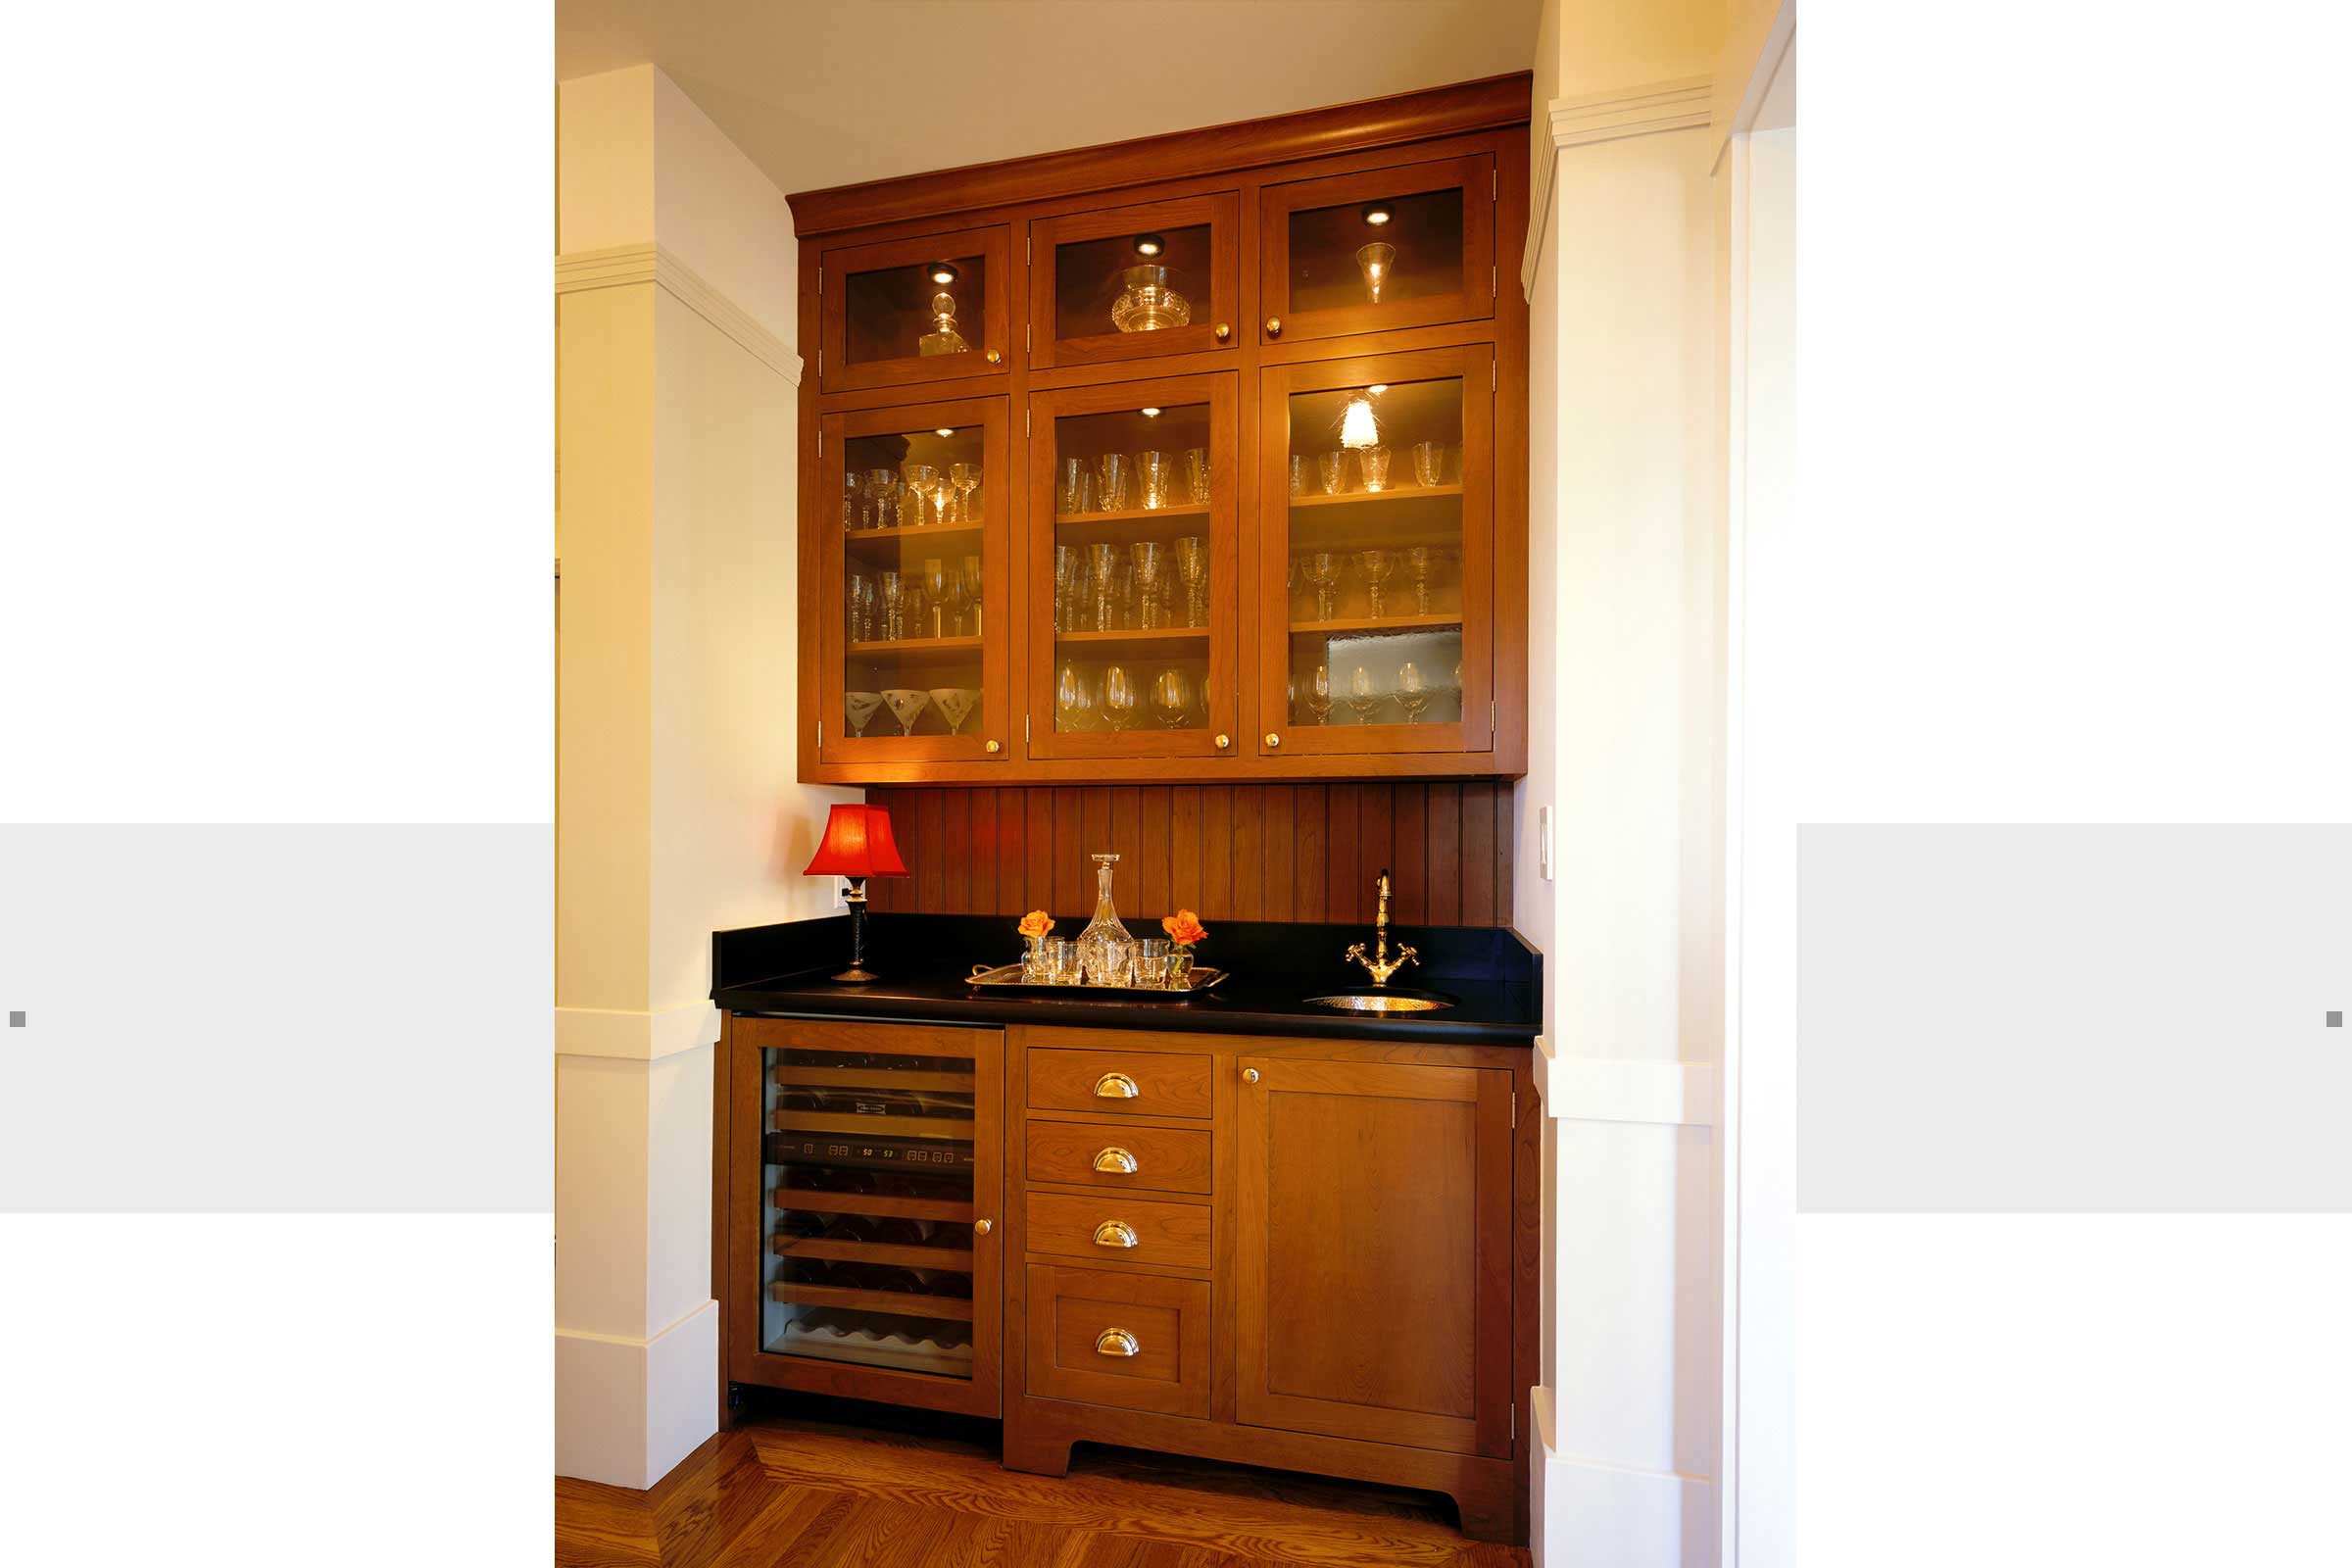 wood crafted butlers pantry and bar area